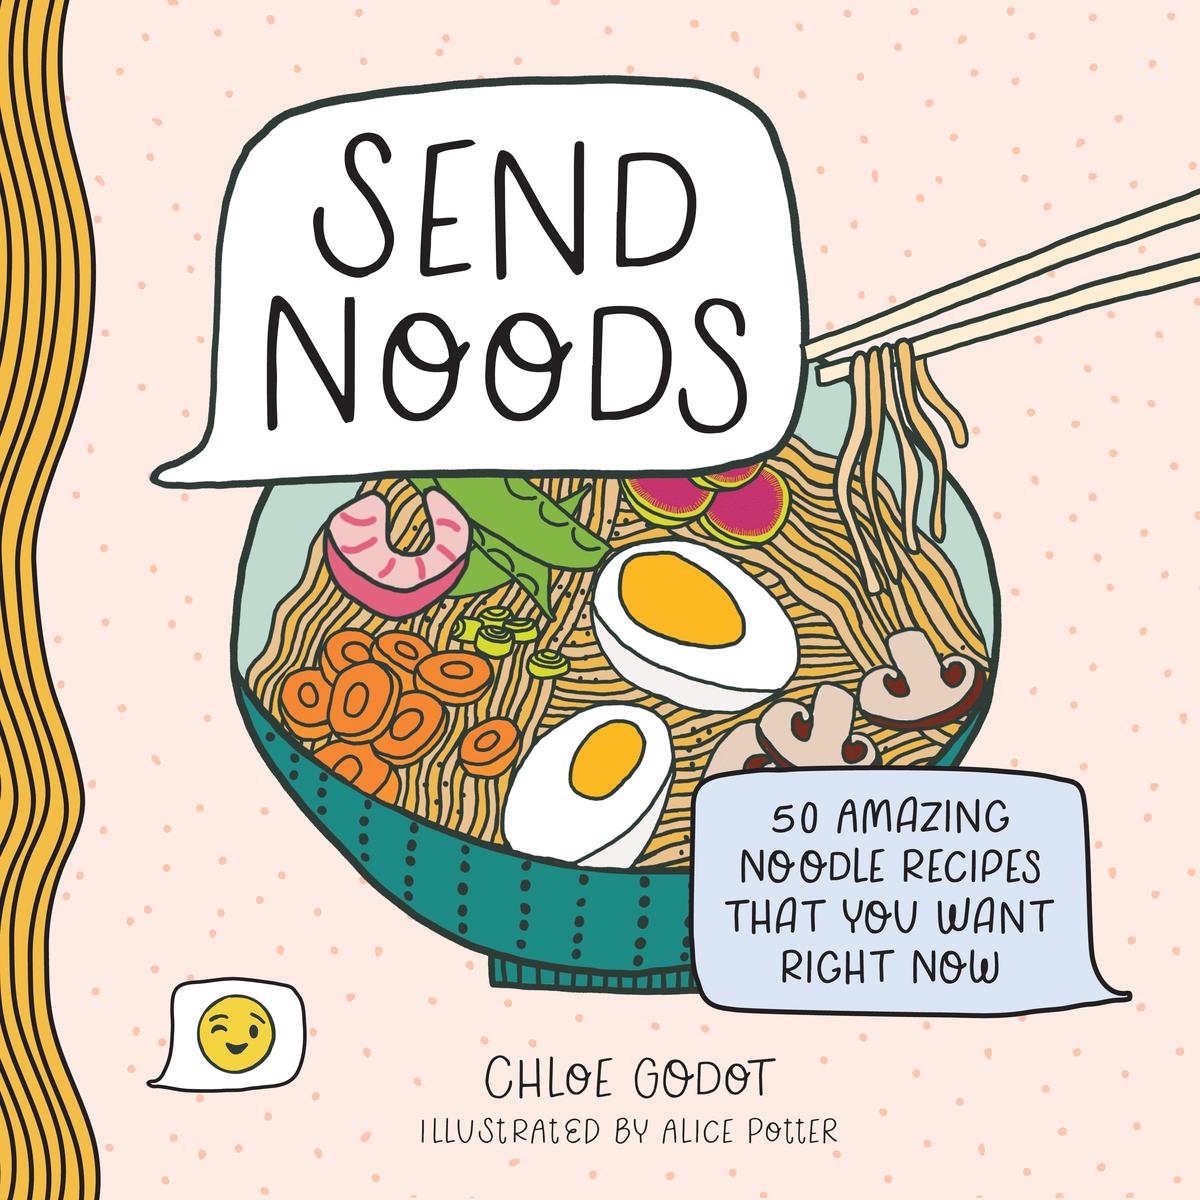 Send Noods: 50 Amazing Noodle Recipes That You Want Right Now